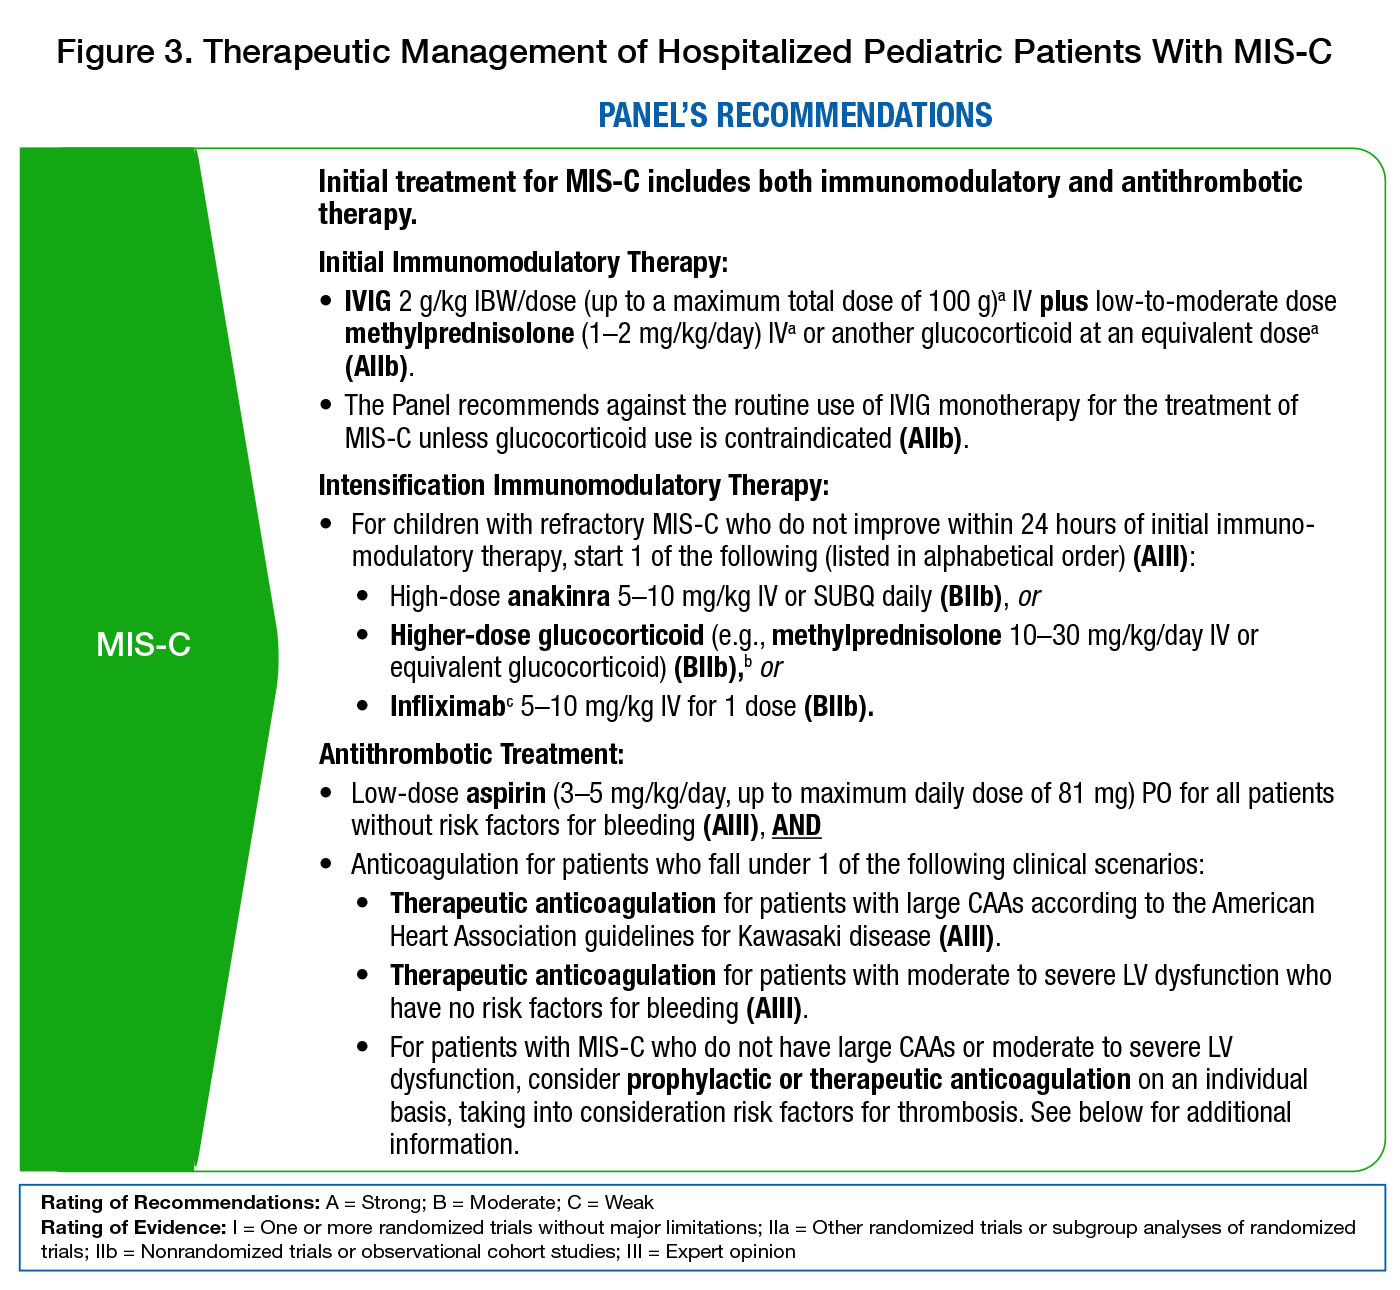 Figure 3. Therapeutic Management of Hospitalized Pediatric Patients With MIS-C